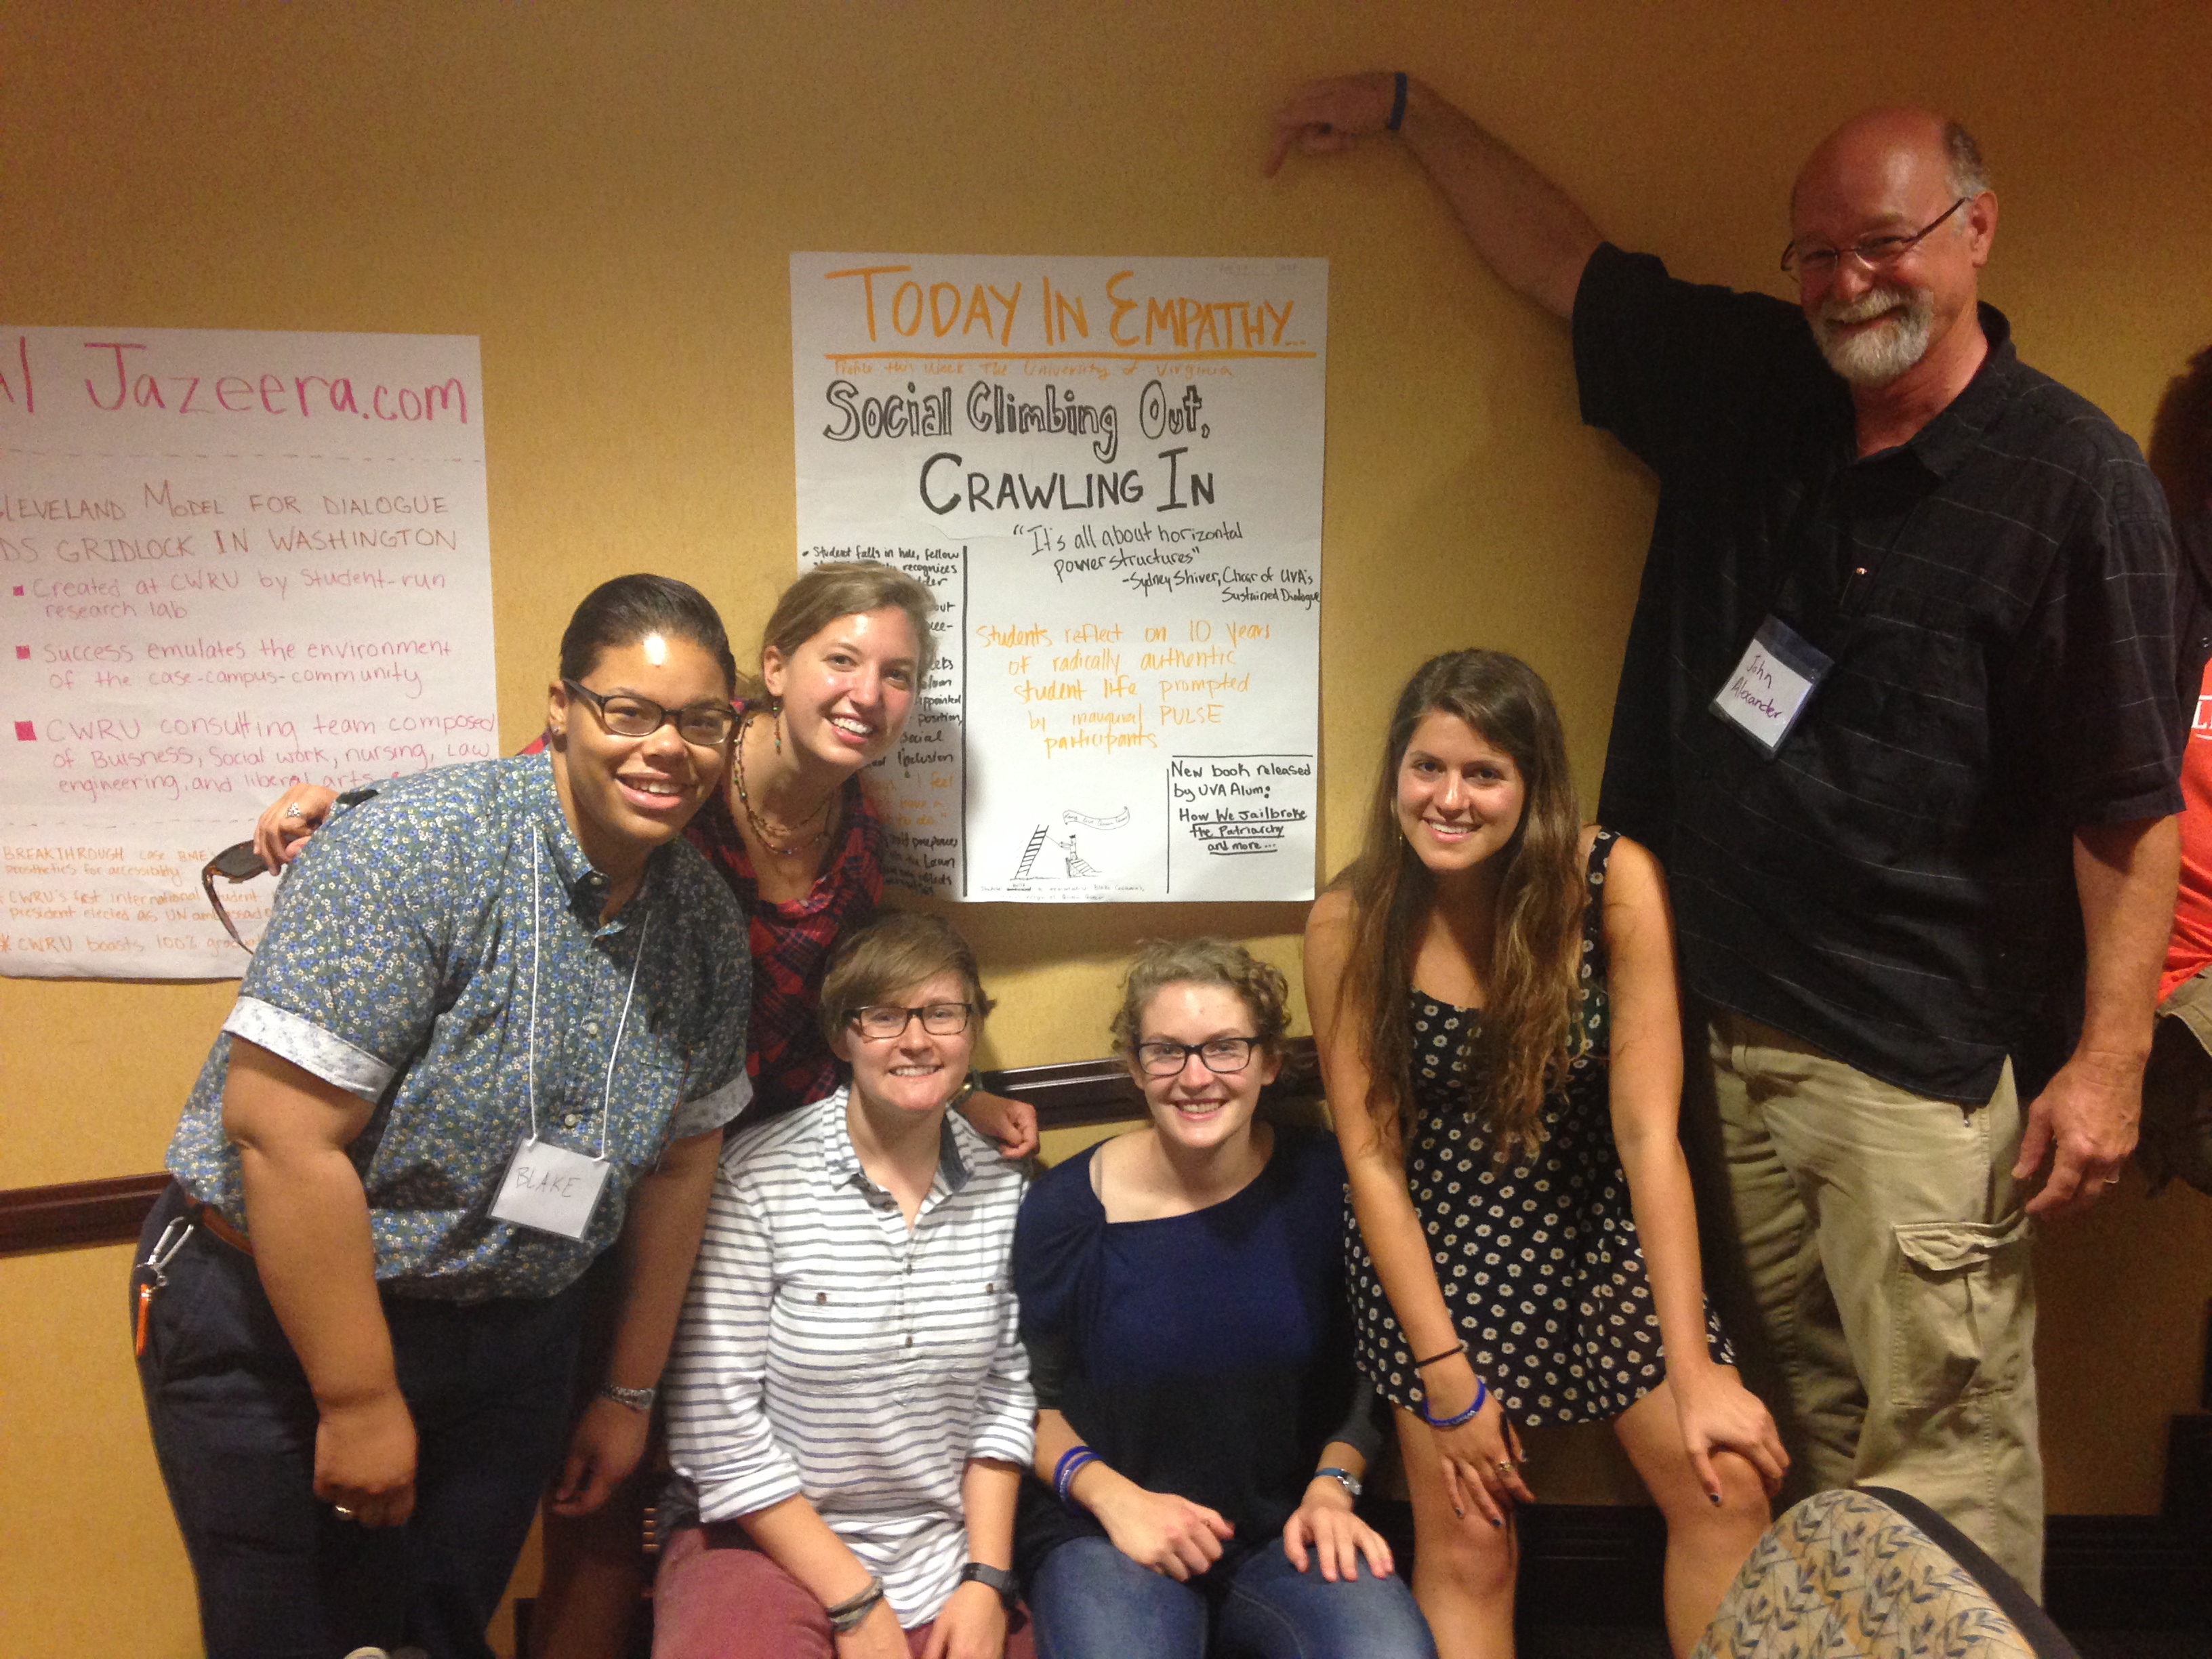 Group photo in front of a poster that reads: Today in Empathy Social climbing out, crawling in